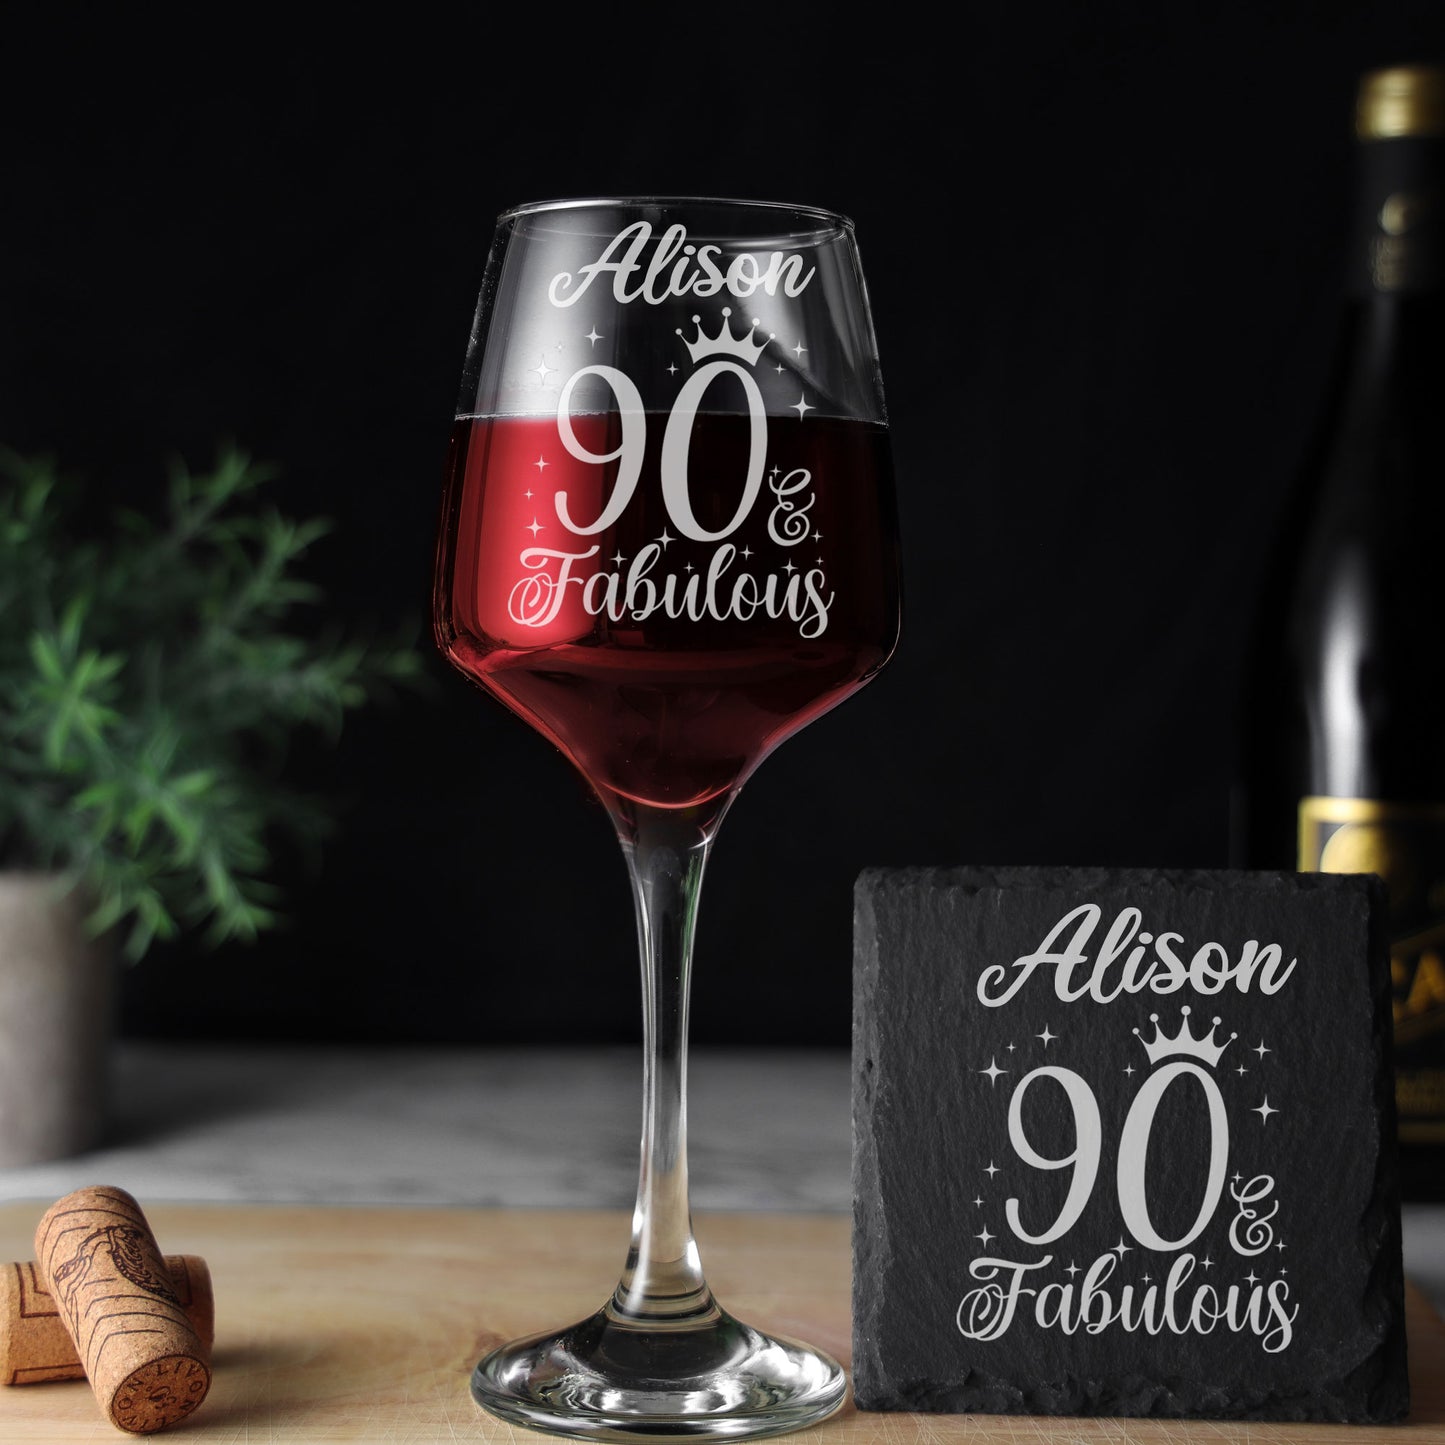 90 & Fabulous 90th Birthday Gift Engraved Wine Glass and/or Coaster Set  - Always Looking Good -   